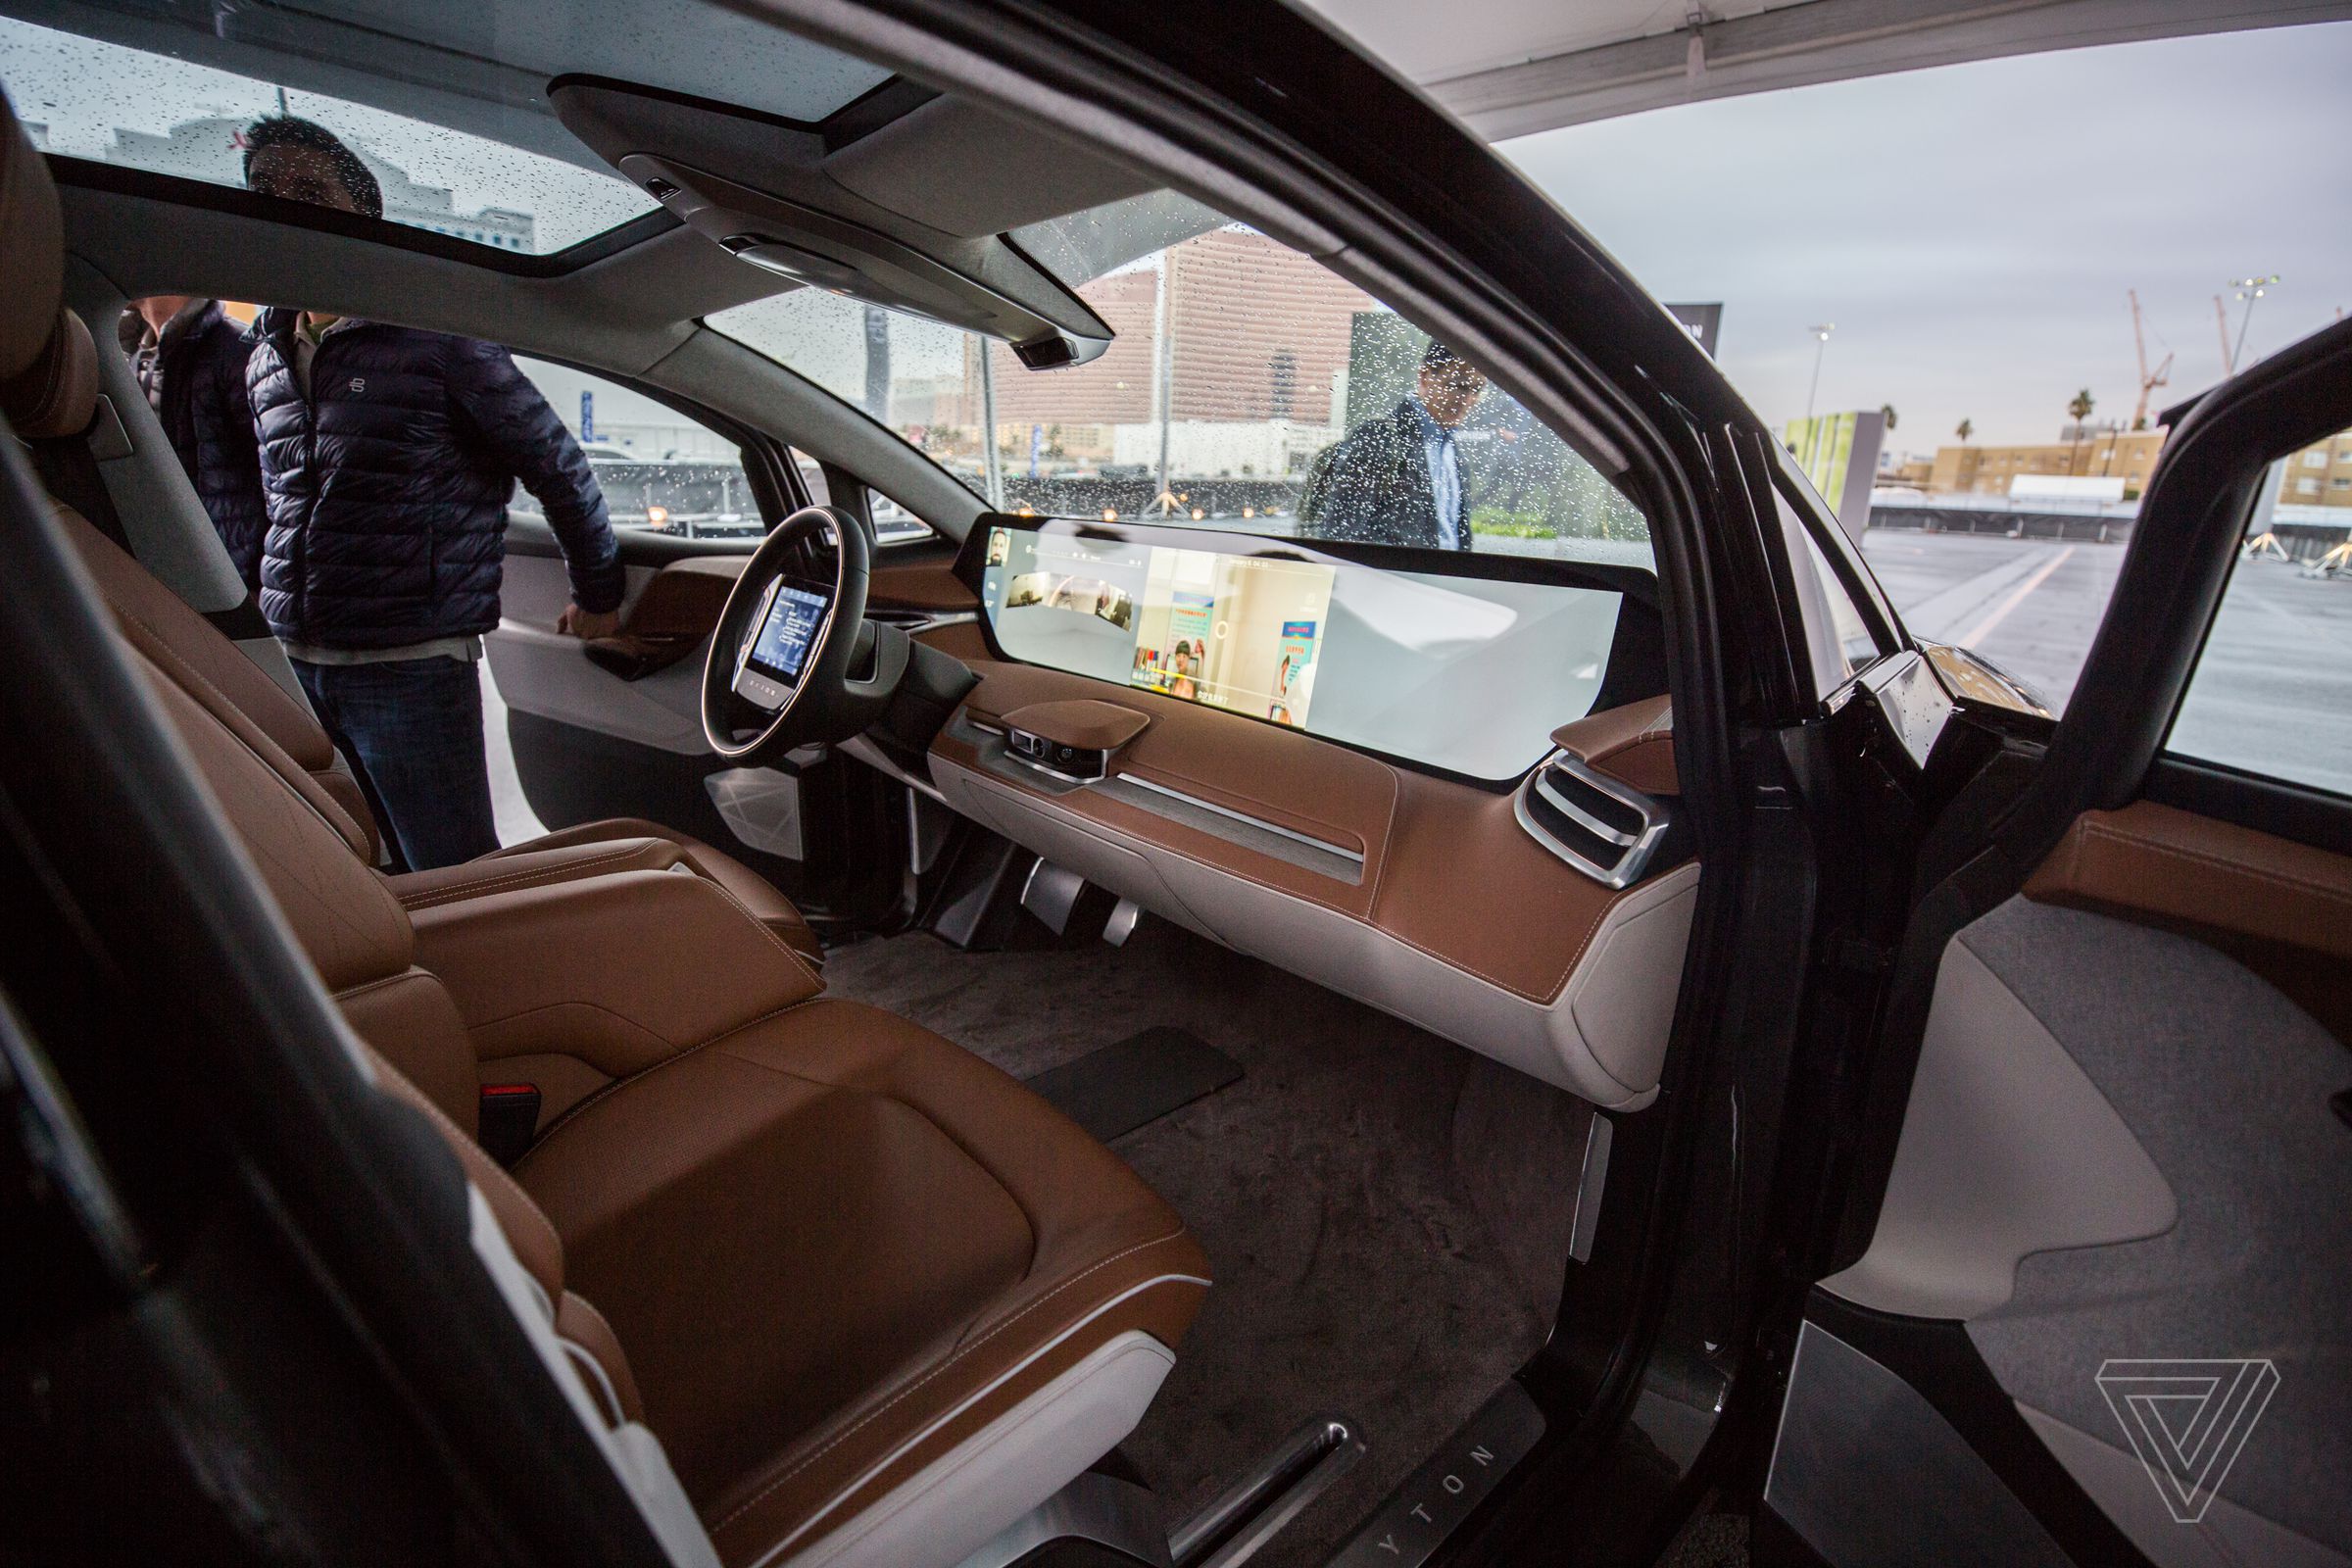 The screens on Byton’s SUV drew headlines when it was announced this past January. The K-Byte sedan will have similar technological features.